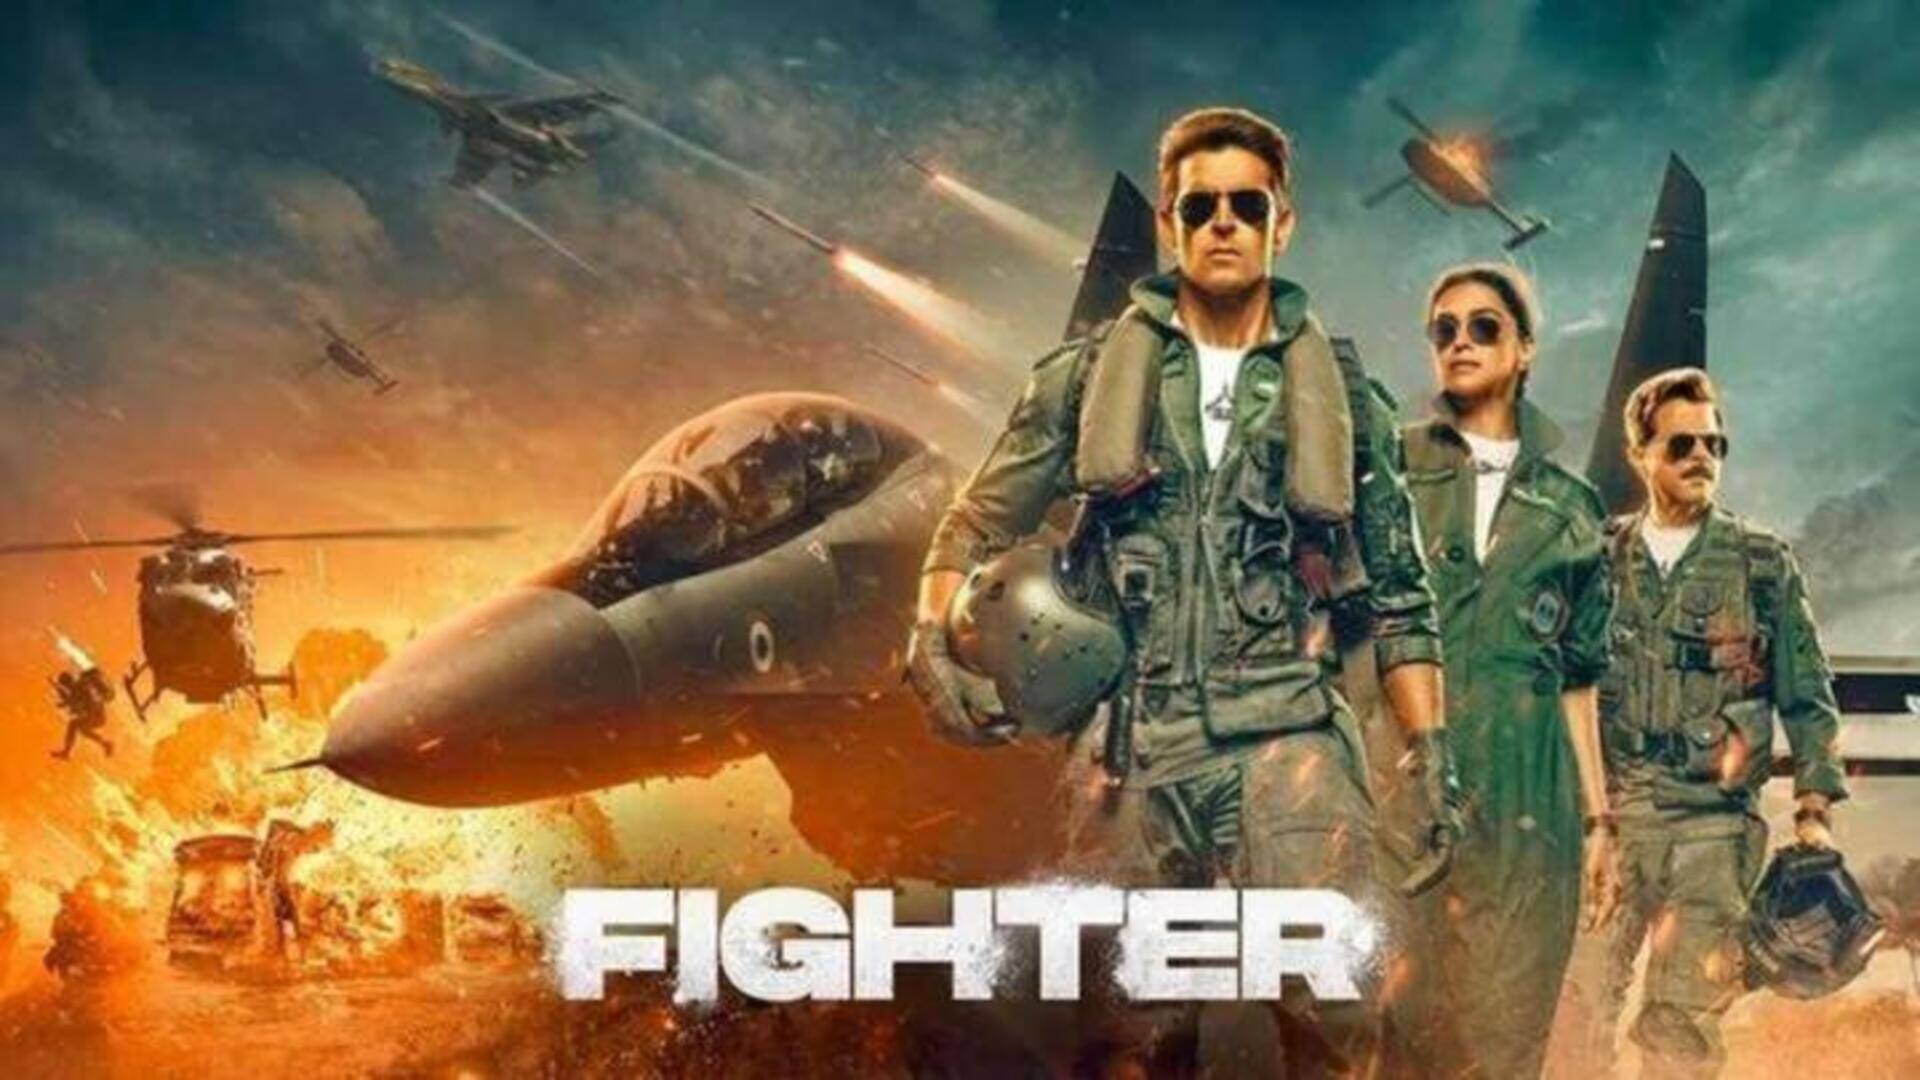 Box office collection: 'Fighter' earns over Rs. 10cr on Saturday